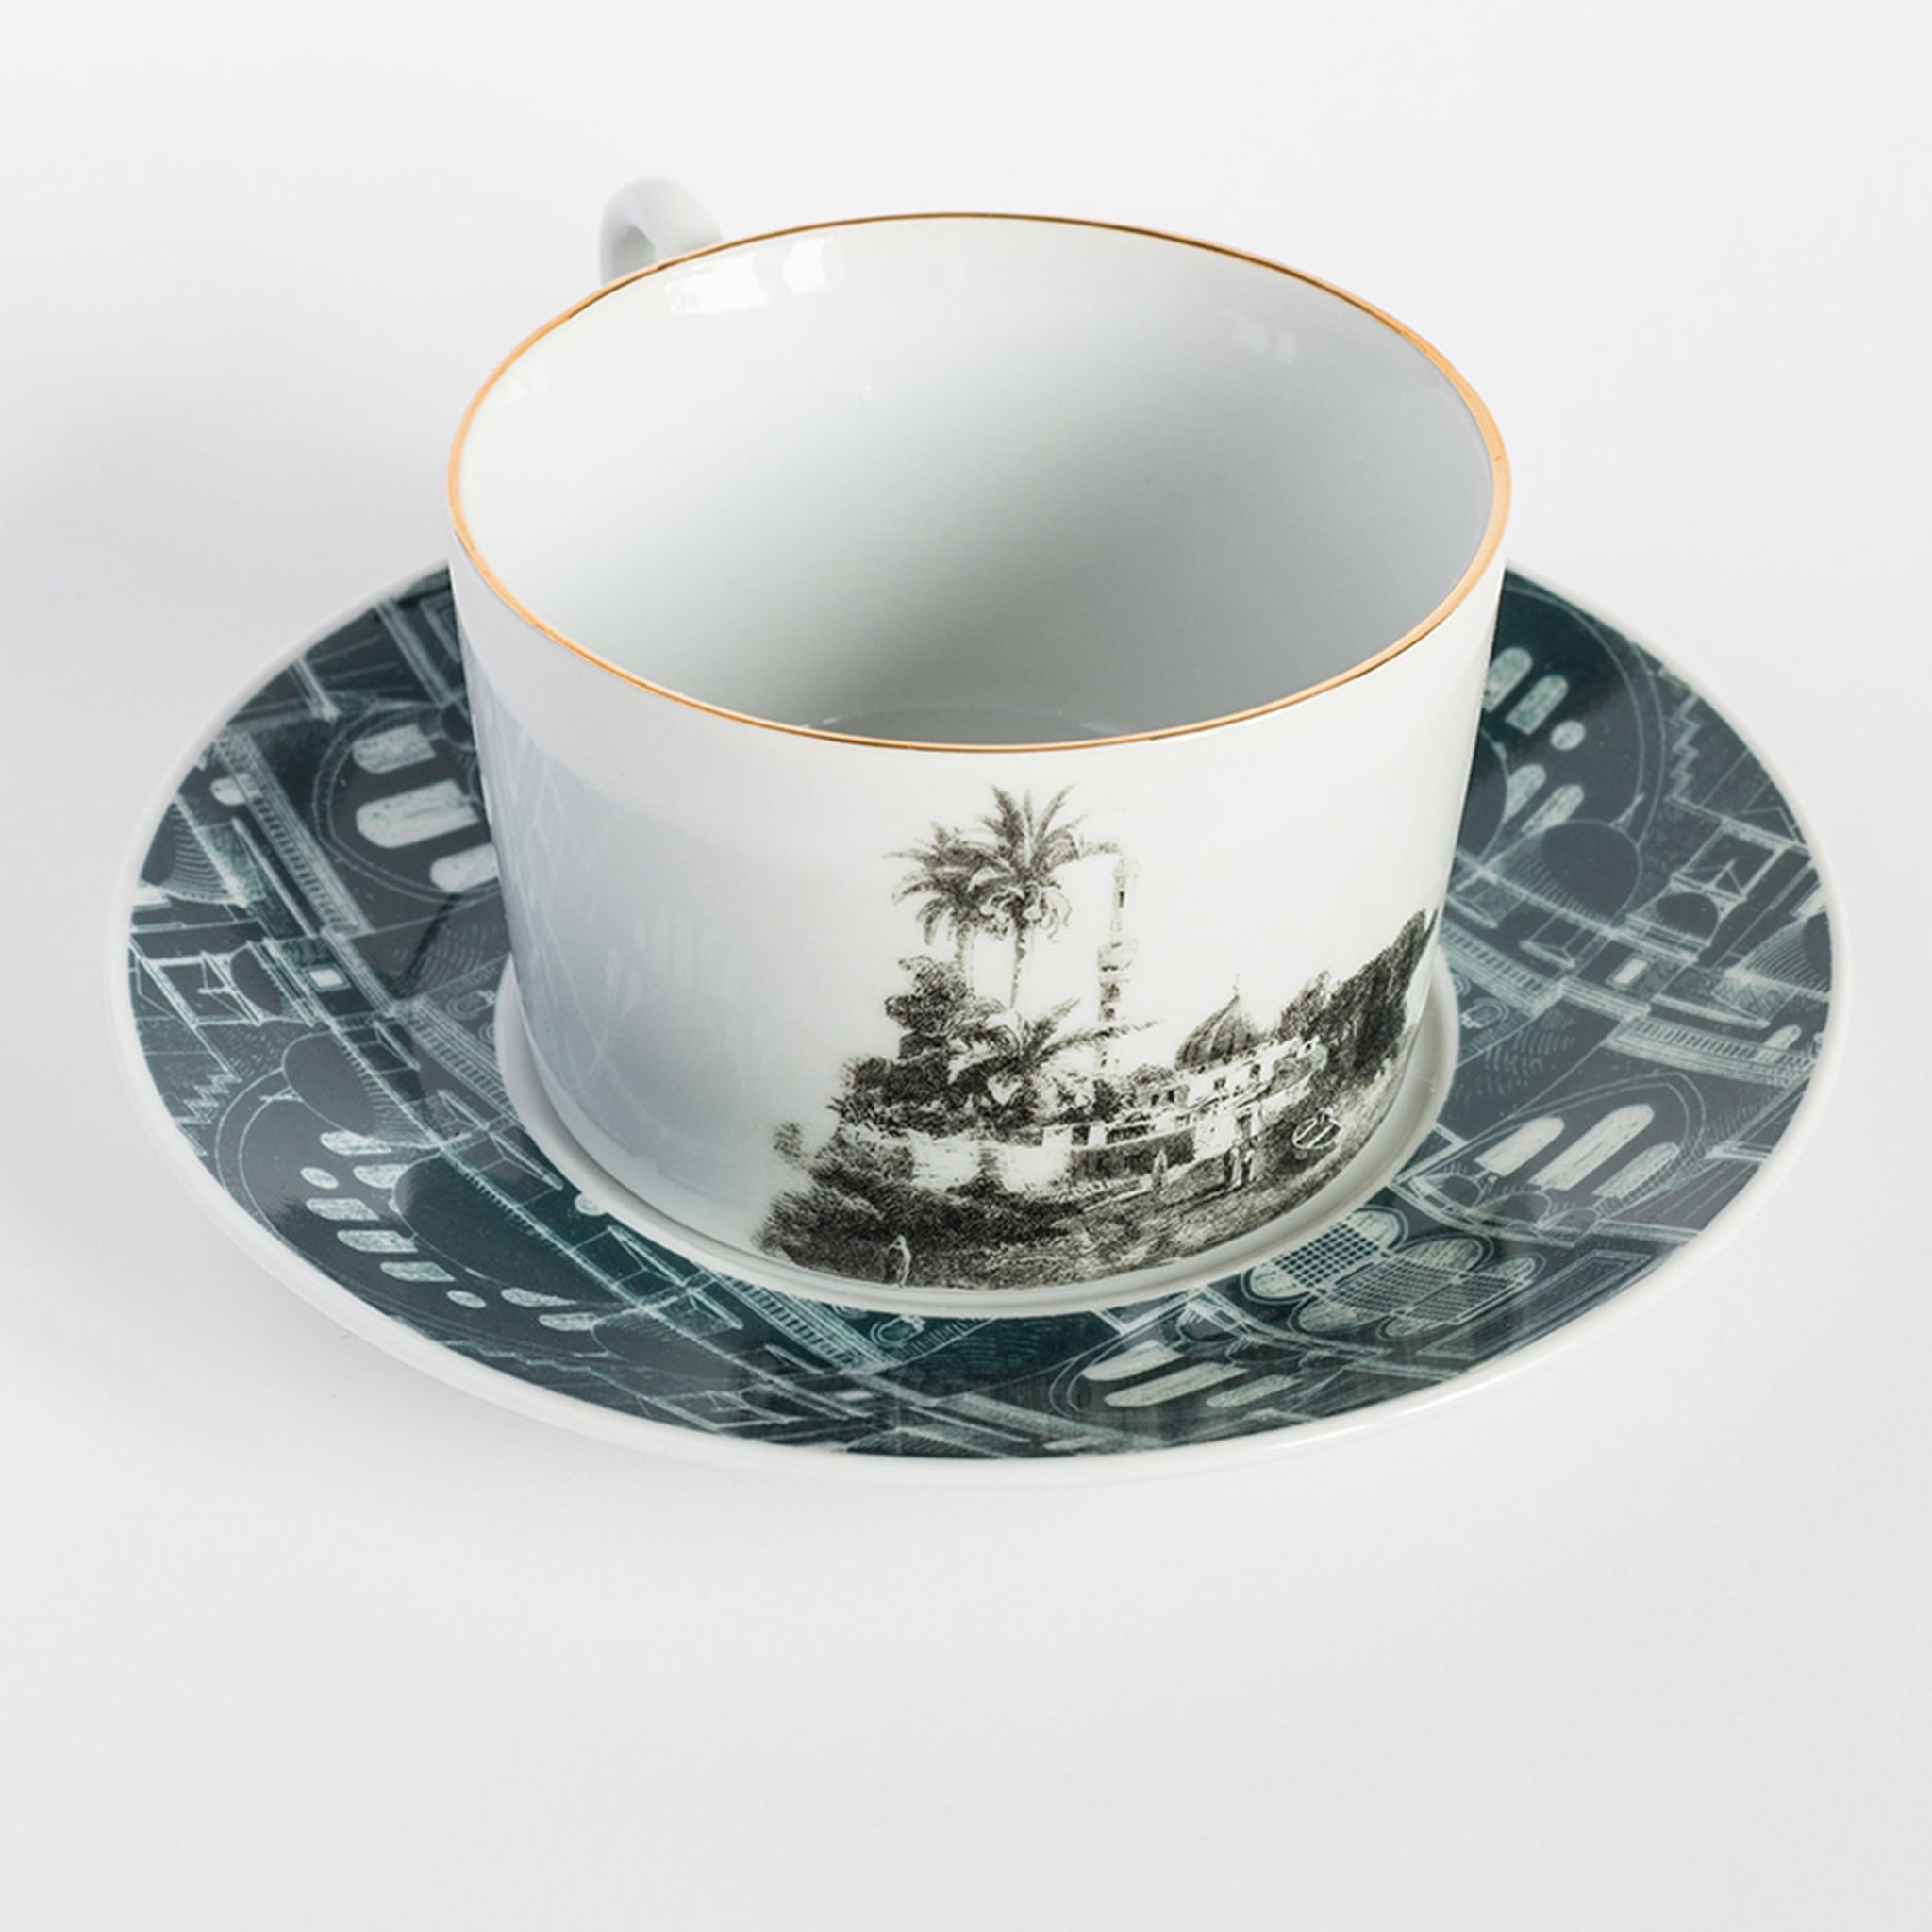 Lebanon Set of 6 Tea Cups with Saucers - Alternative view 3